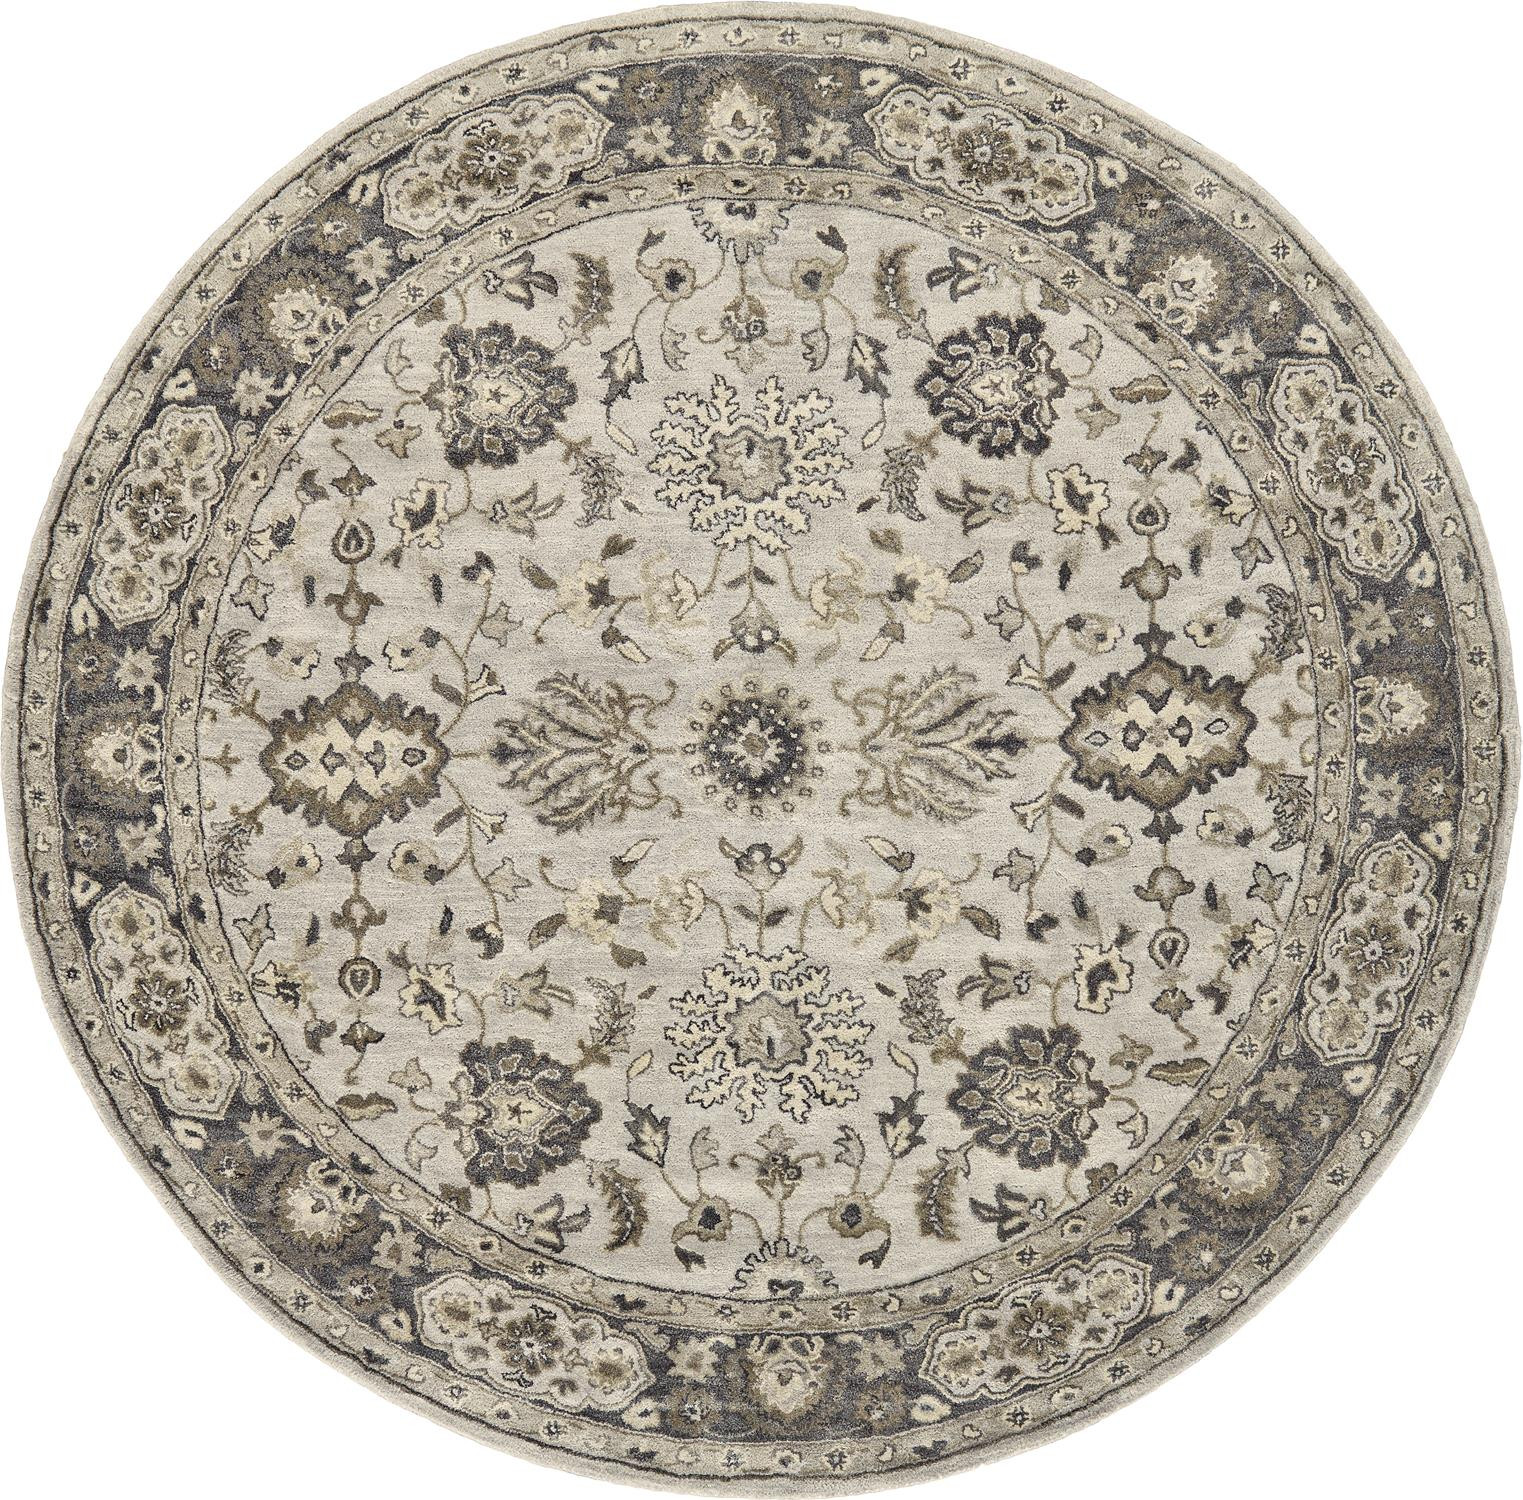 10' Gray Ivory And Taupe Round Wool Floral Tufted Handmade Stain Resistant Area Rug-511278-1